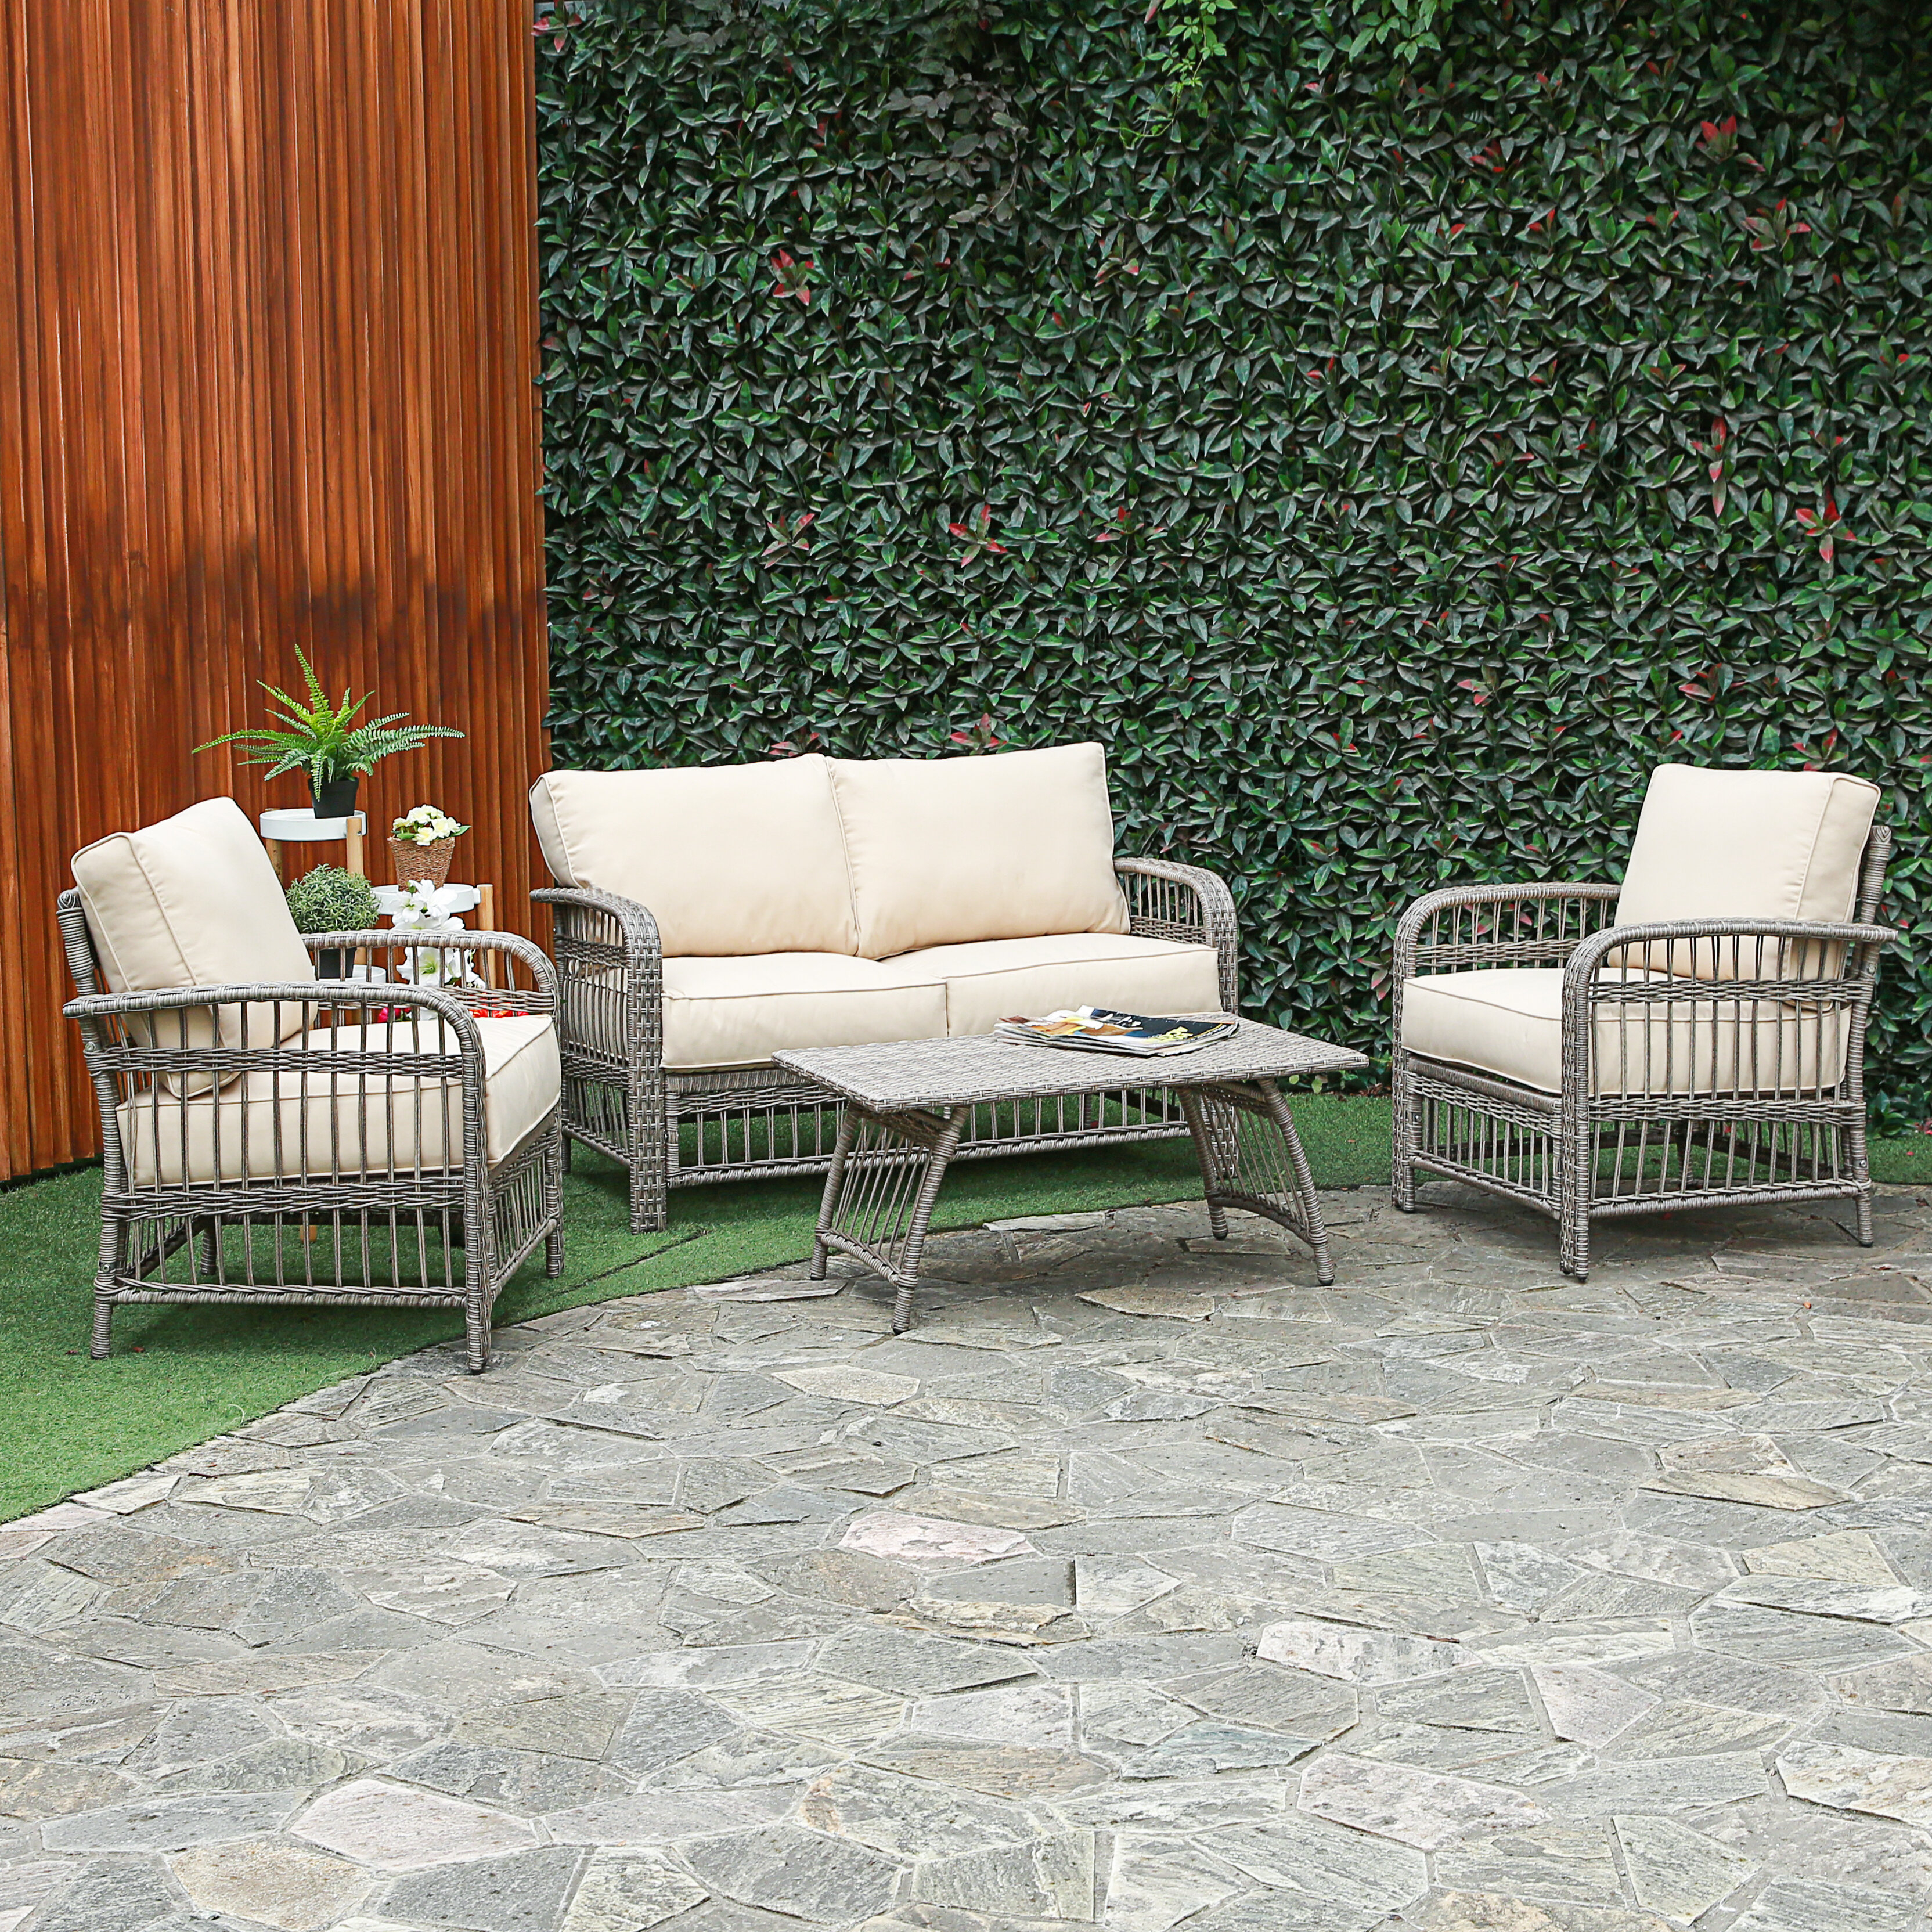 Rona 4 Piece Rattan Sofa Seating Group With Cushions regarding proportions 3328 X 3328